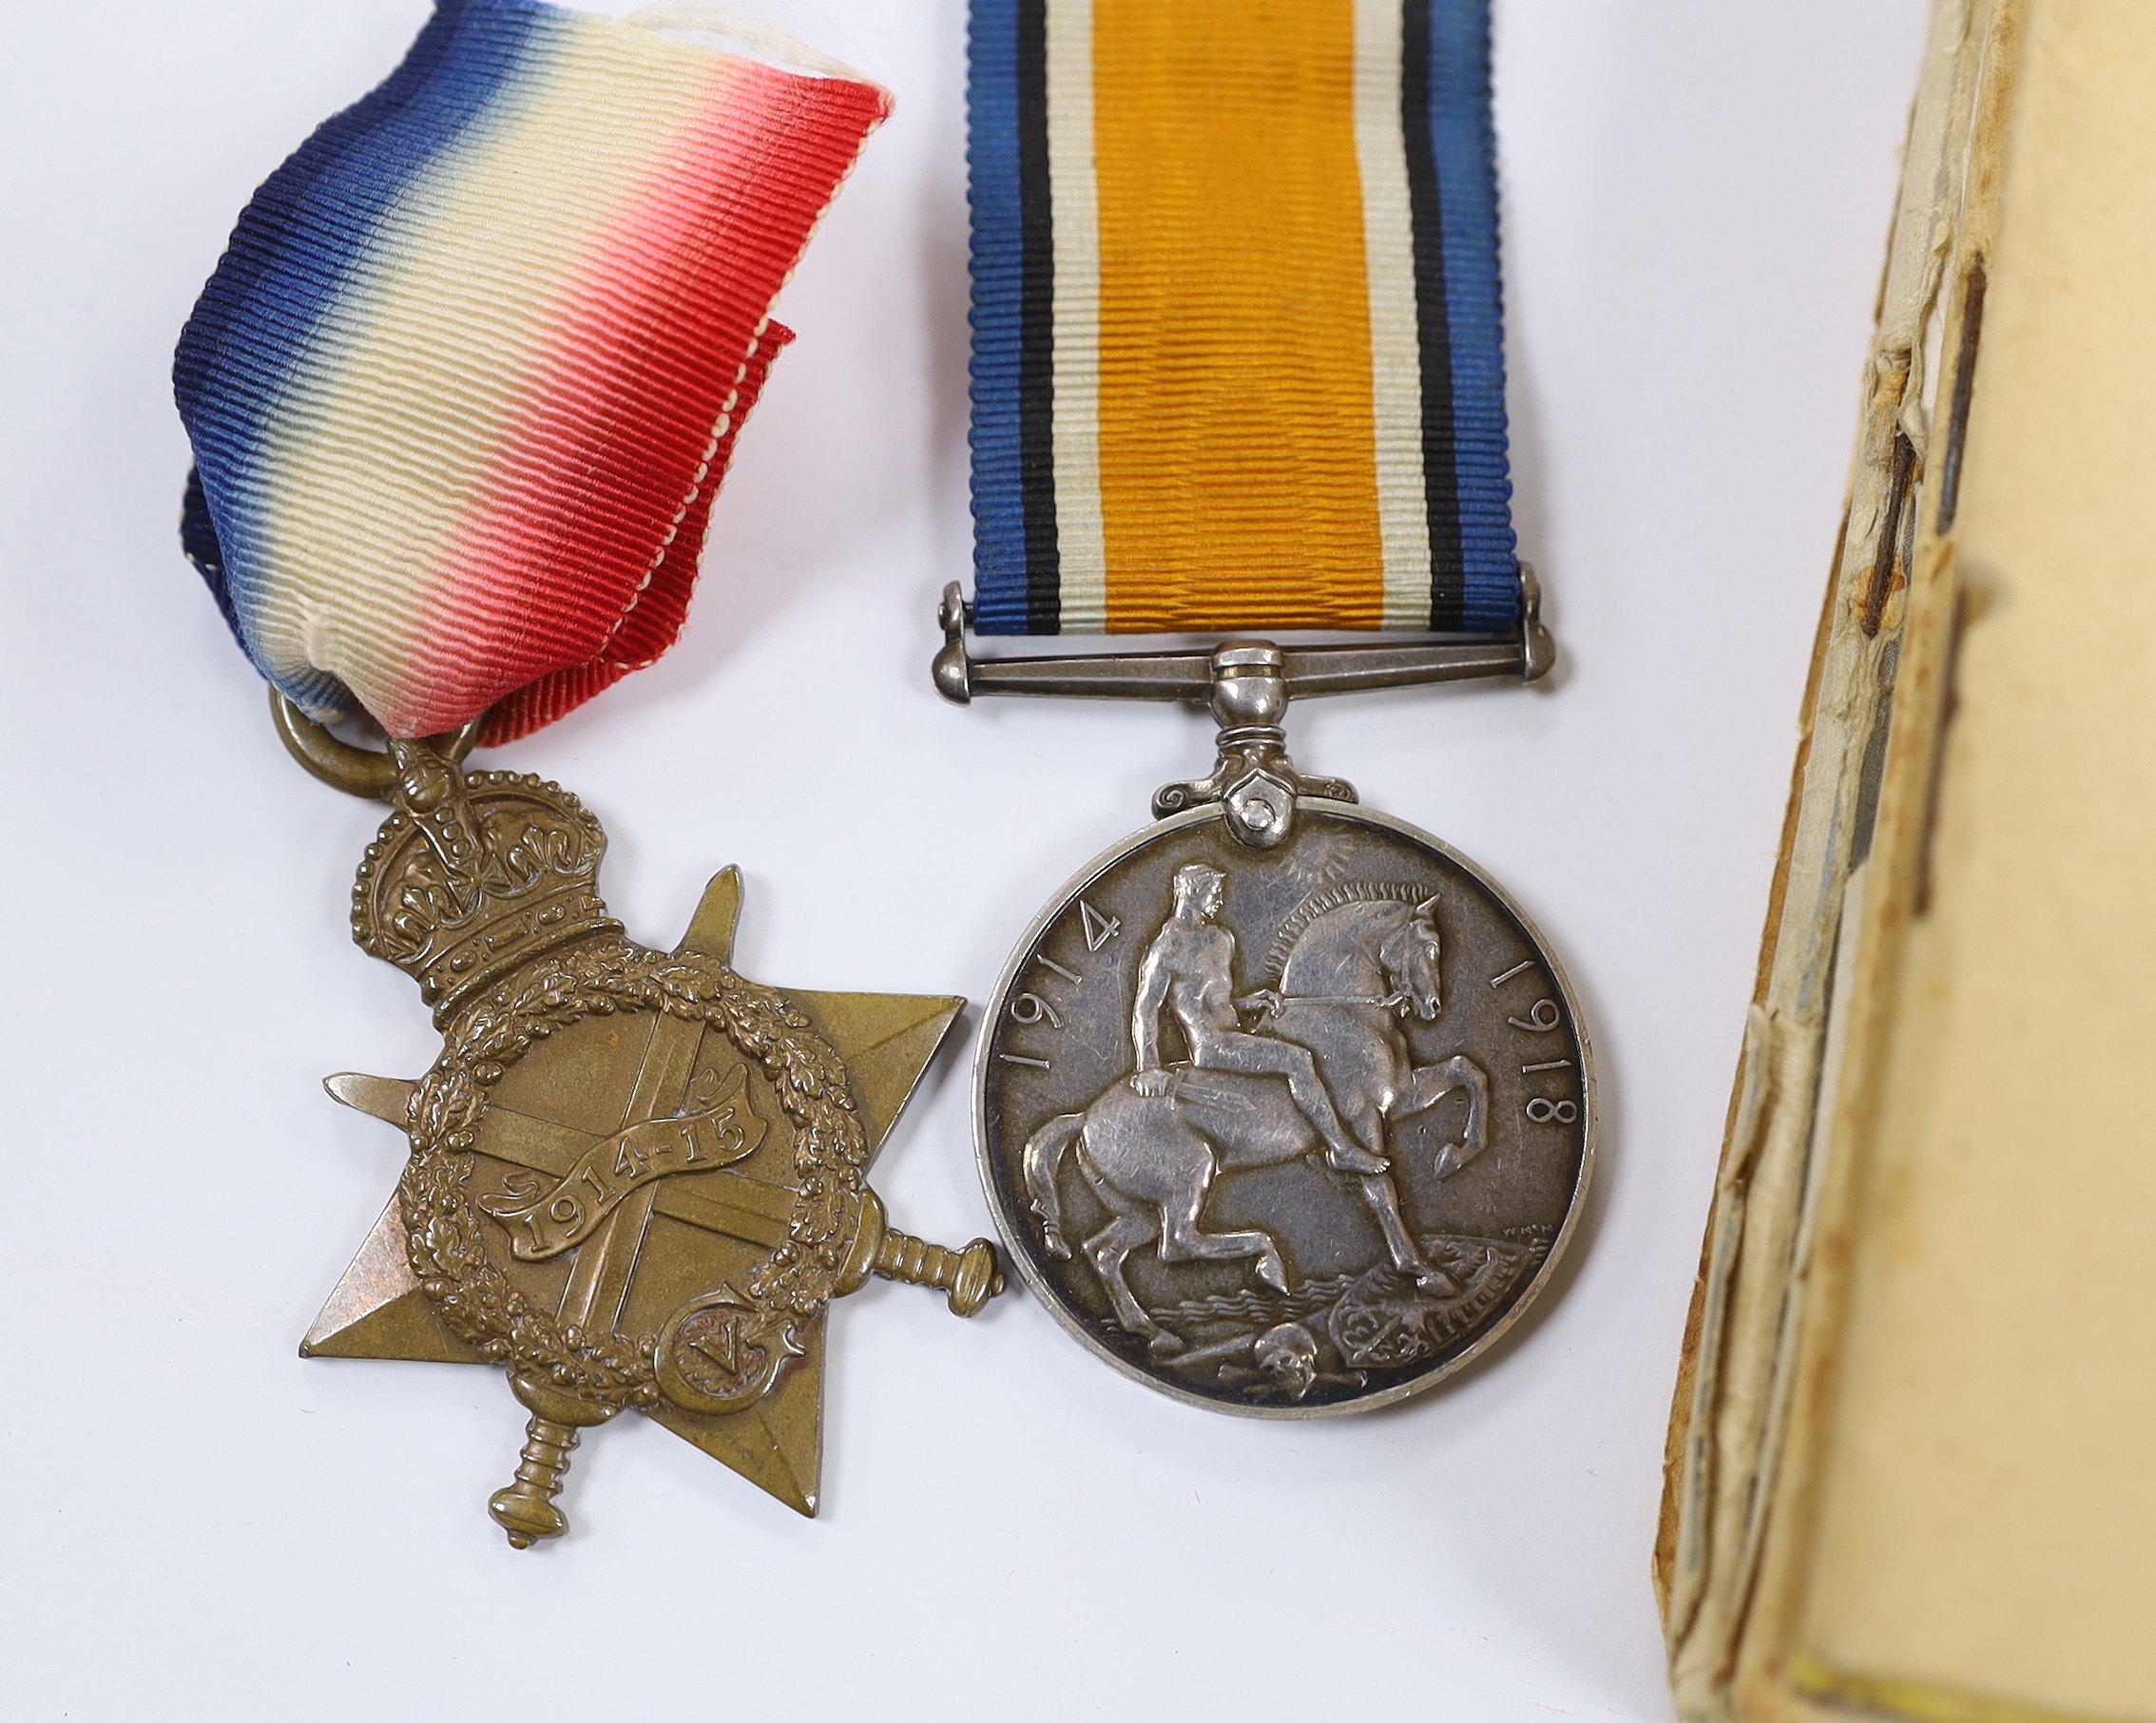 A First World War medal trio to Cpl. E.J. Hannaford, and a small collection of WWII publications including Home Guard instruction booklets, Civil Defence booklets, plus an R.L.S.S. ribbon and a WV badge, etc.